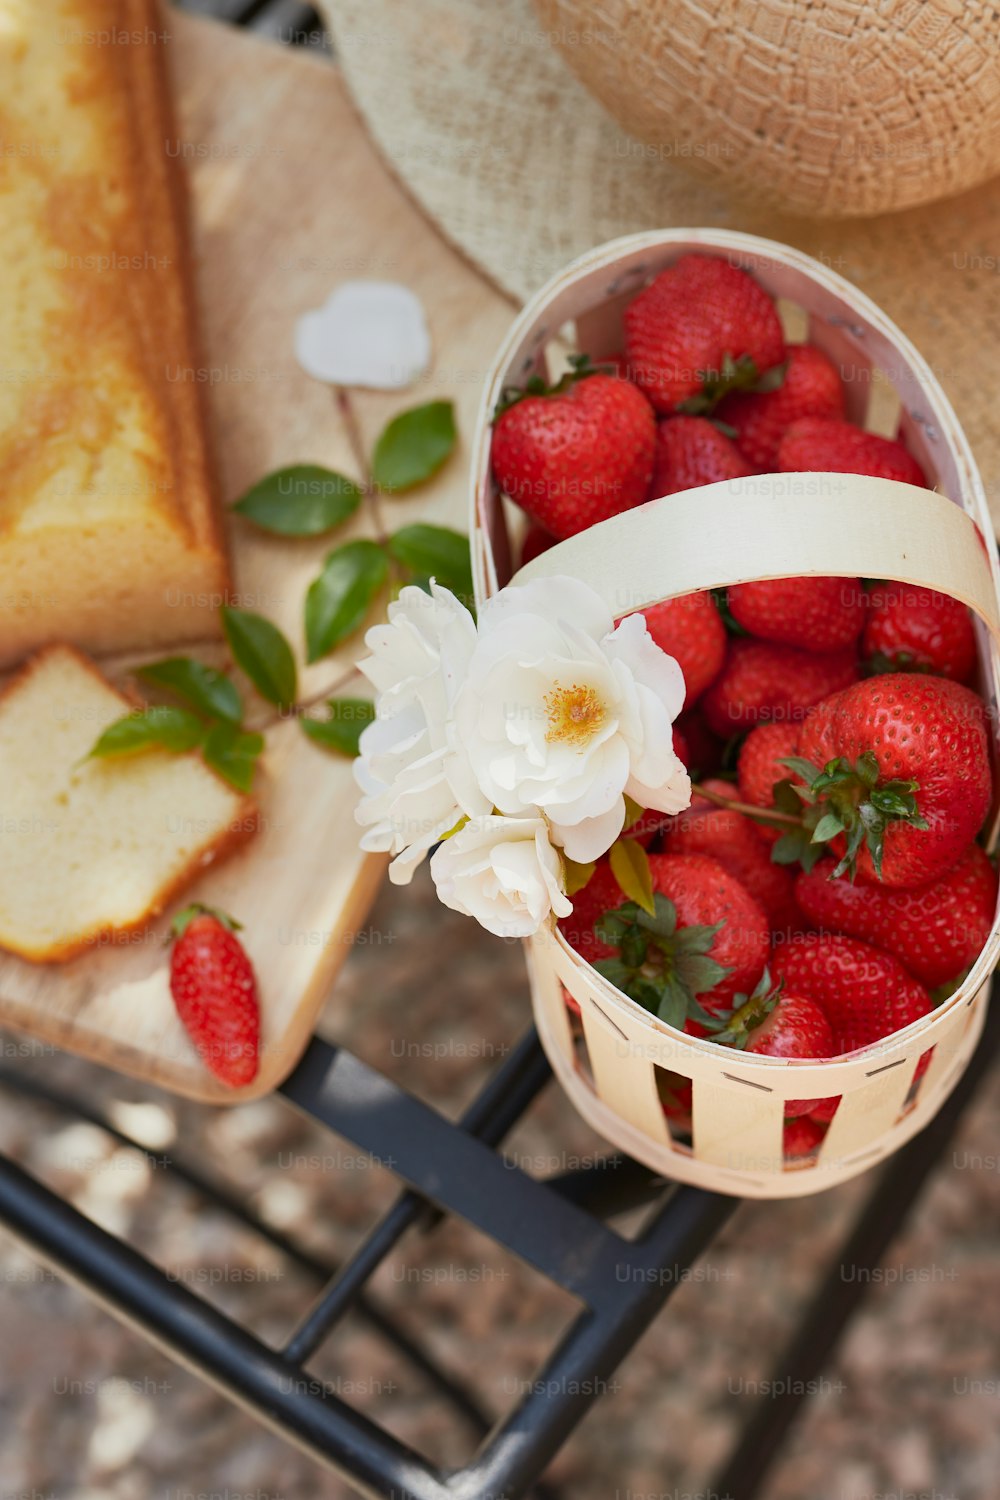 a basket of strawberries next to a piece of bread